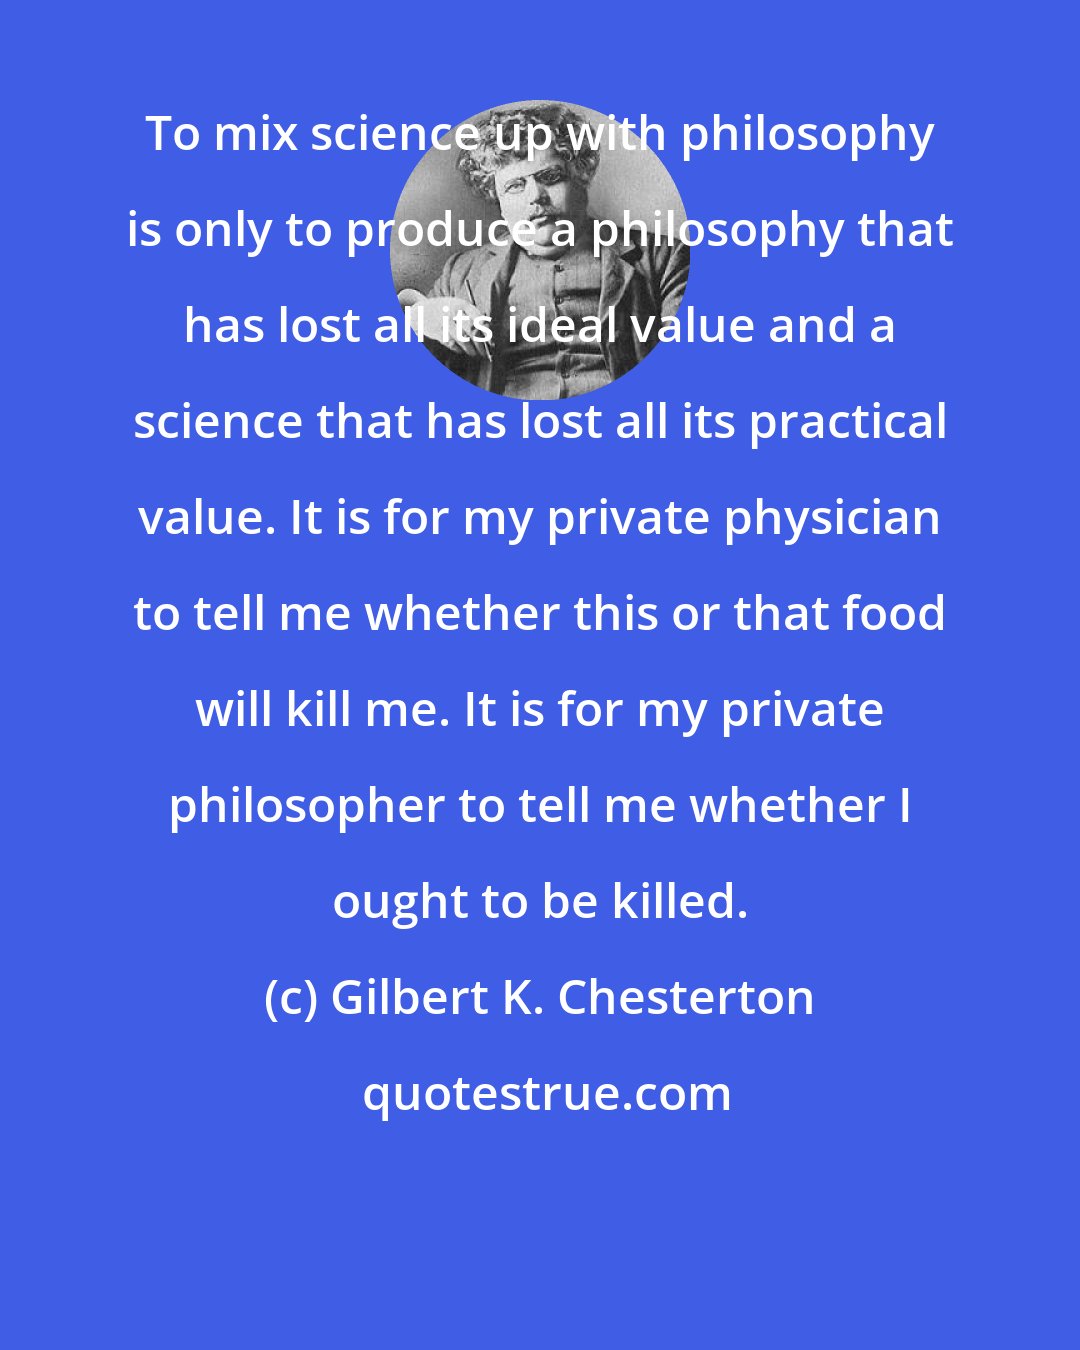 Gilbert K. Chesterton: To mix science up with philosophy is only to produce a philosophy that has lost all its ideal value and a science that has lost all its practical value. It is for my private physician to tell me whether this or that food will kill me. It is for my private philosopher to tell me whether I ought to be killed.